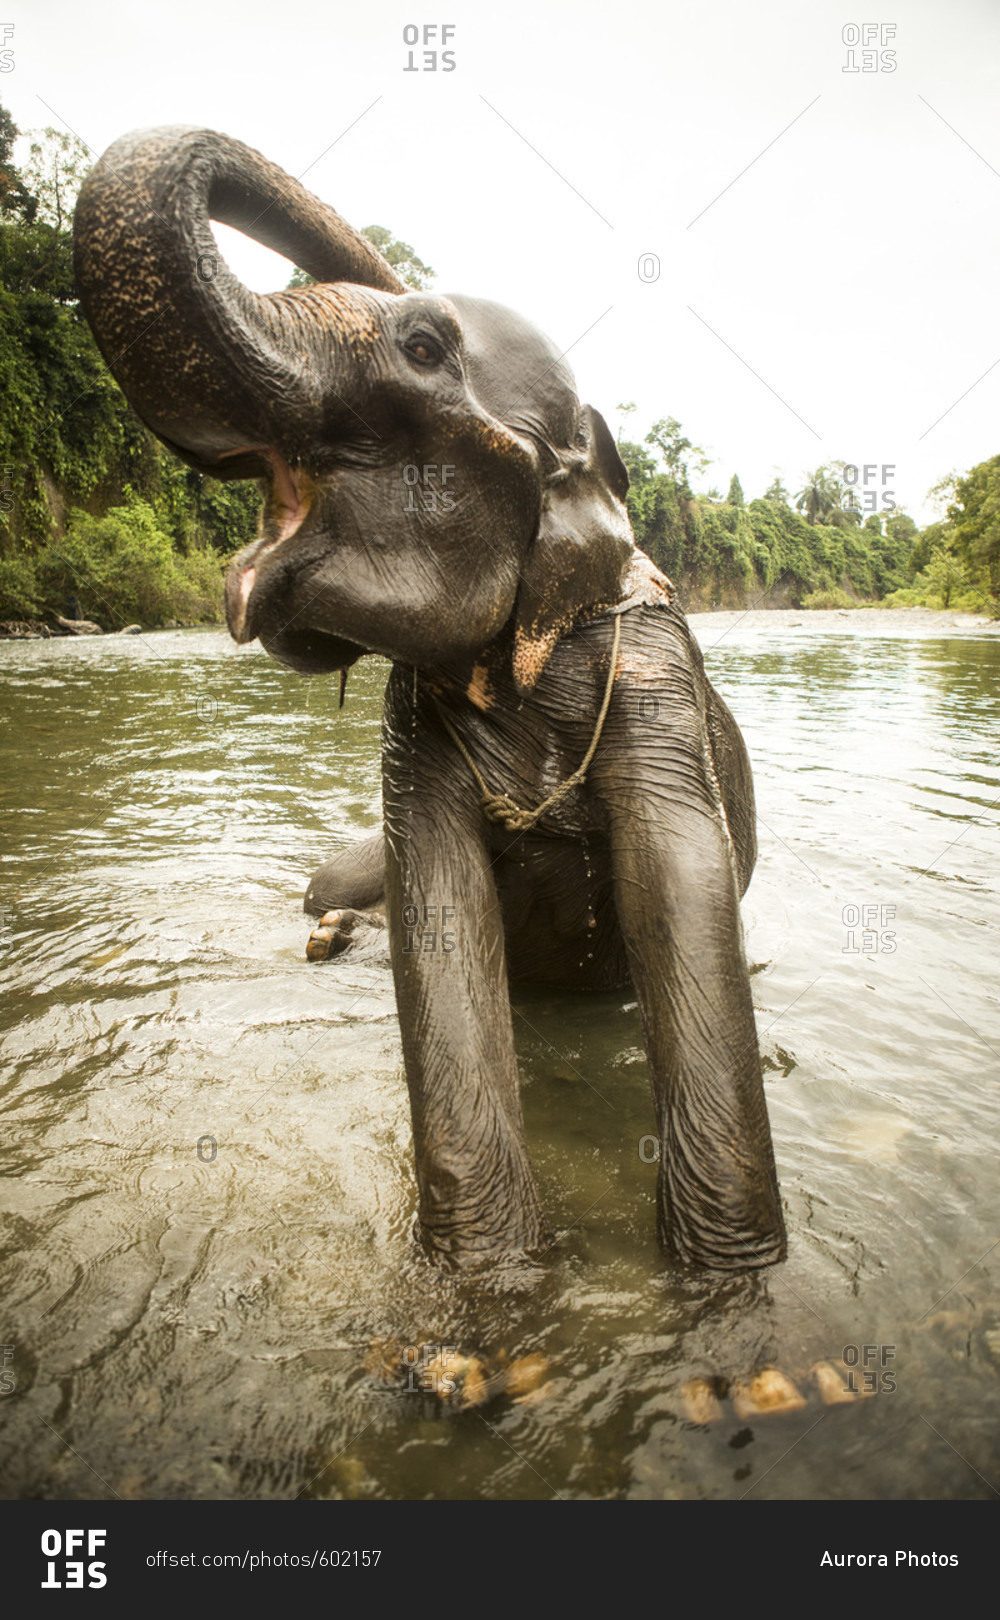 A female Sumatran elephant stretches while bathing in a river in north Sumatra, Indonesia. Many of these elephants were rescued from being labor animals, but are still kept in less than ideal conditions.